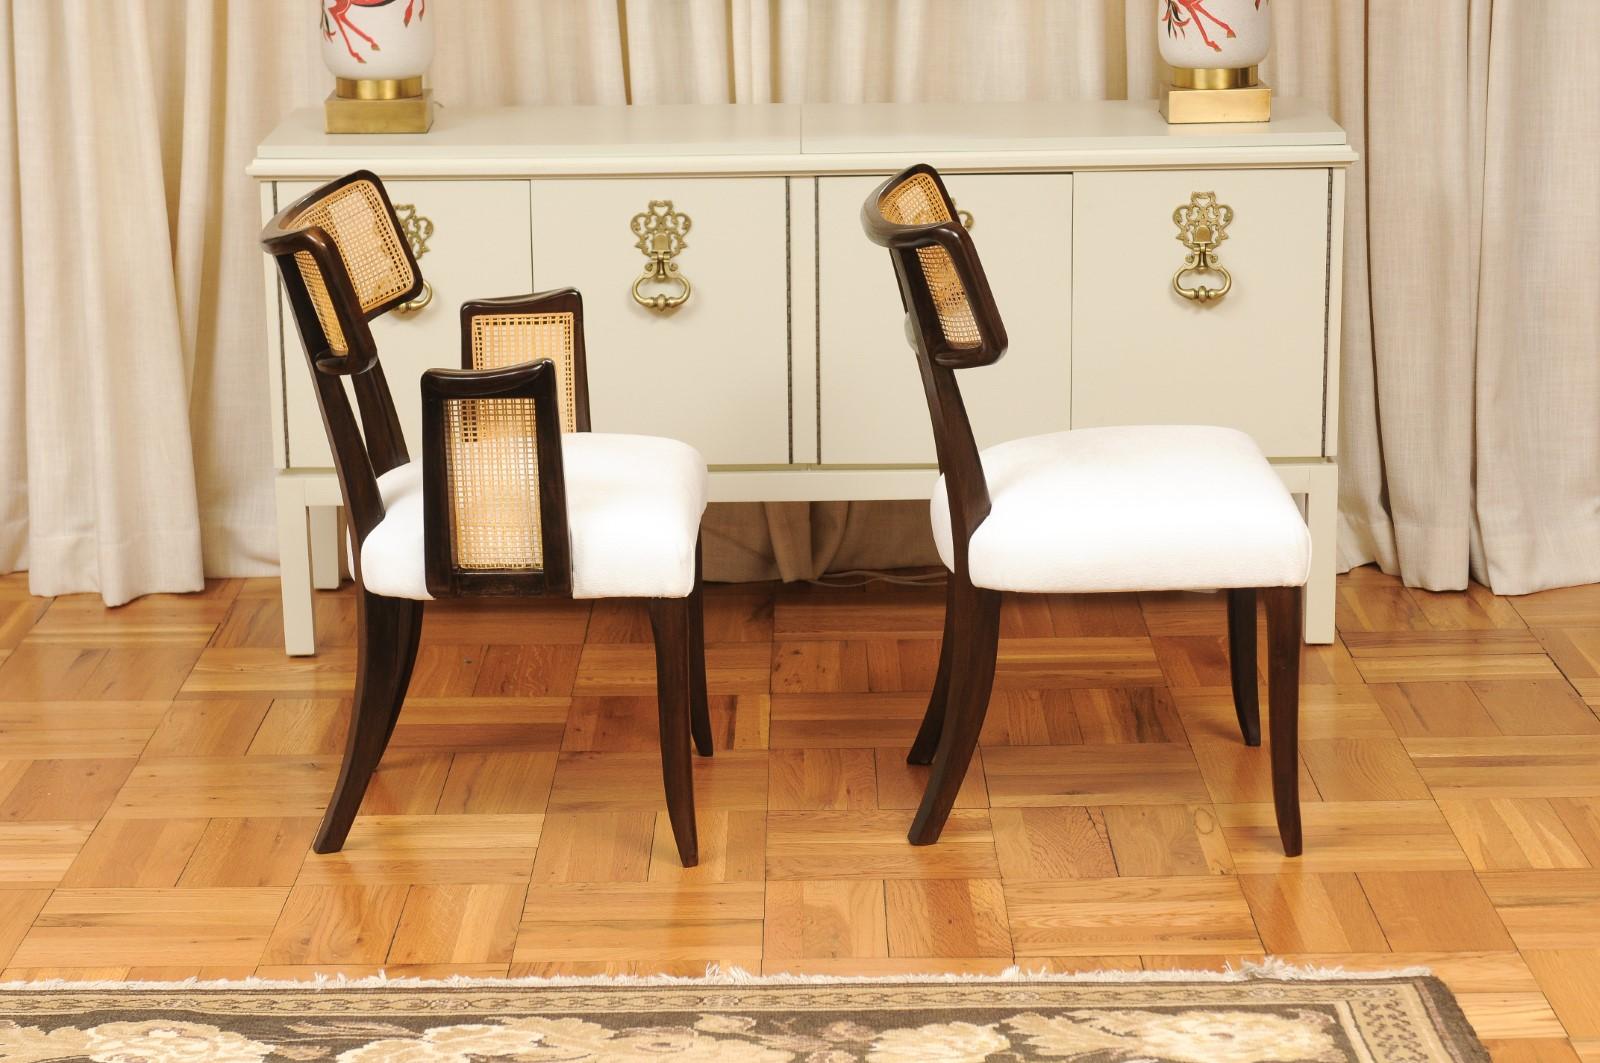 Remarkable Set of 14 Klismos Cane Dining Chairs by Edward Wormley, circa 1948 For Sale 2